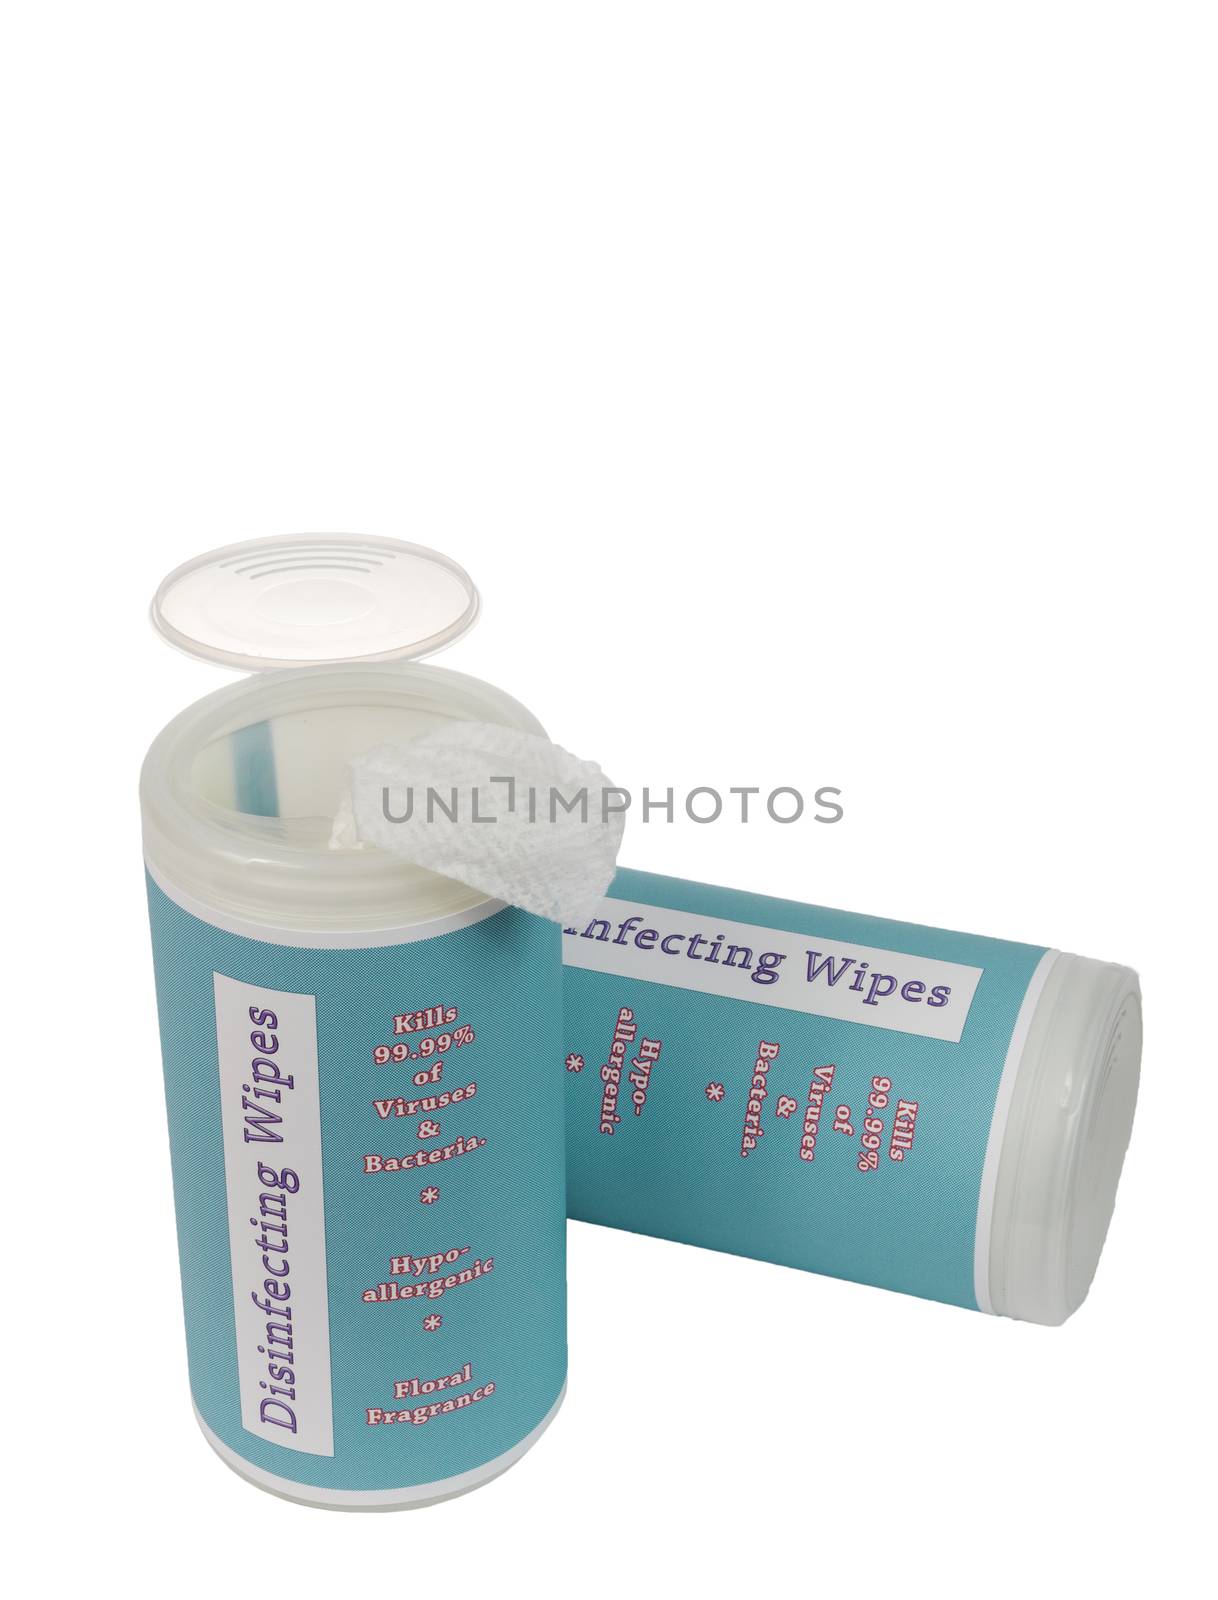 Containers of Disinfectant Wipes Isolated On White by stockbuster1